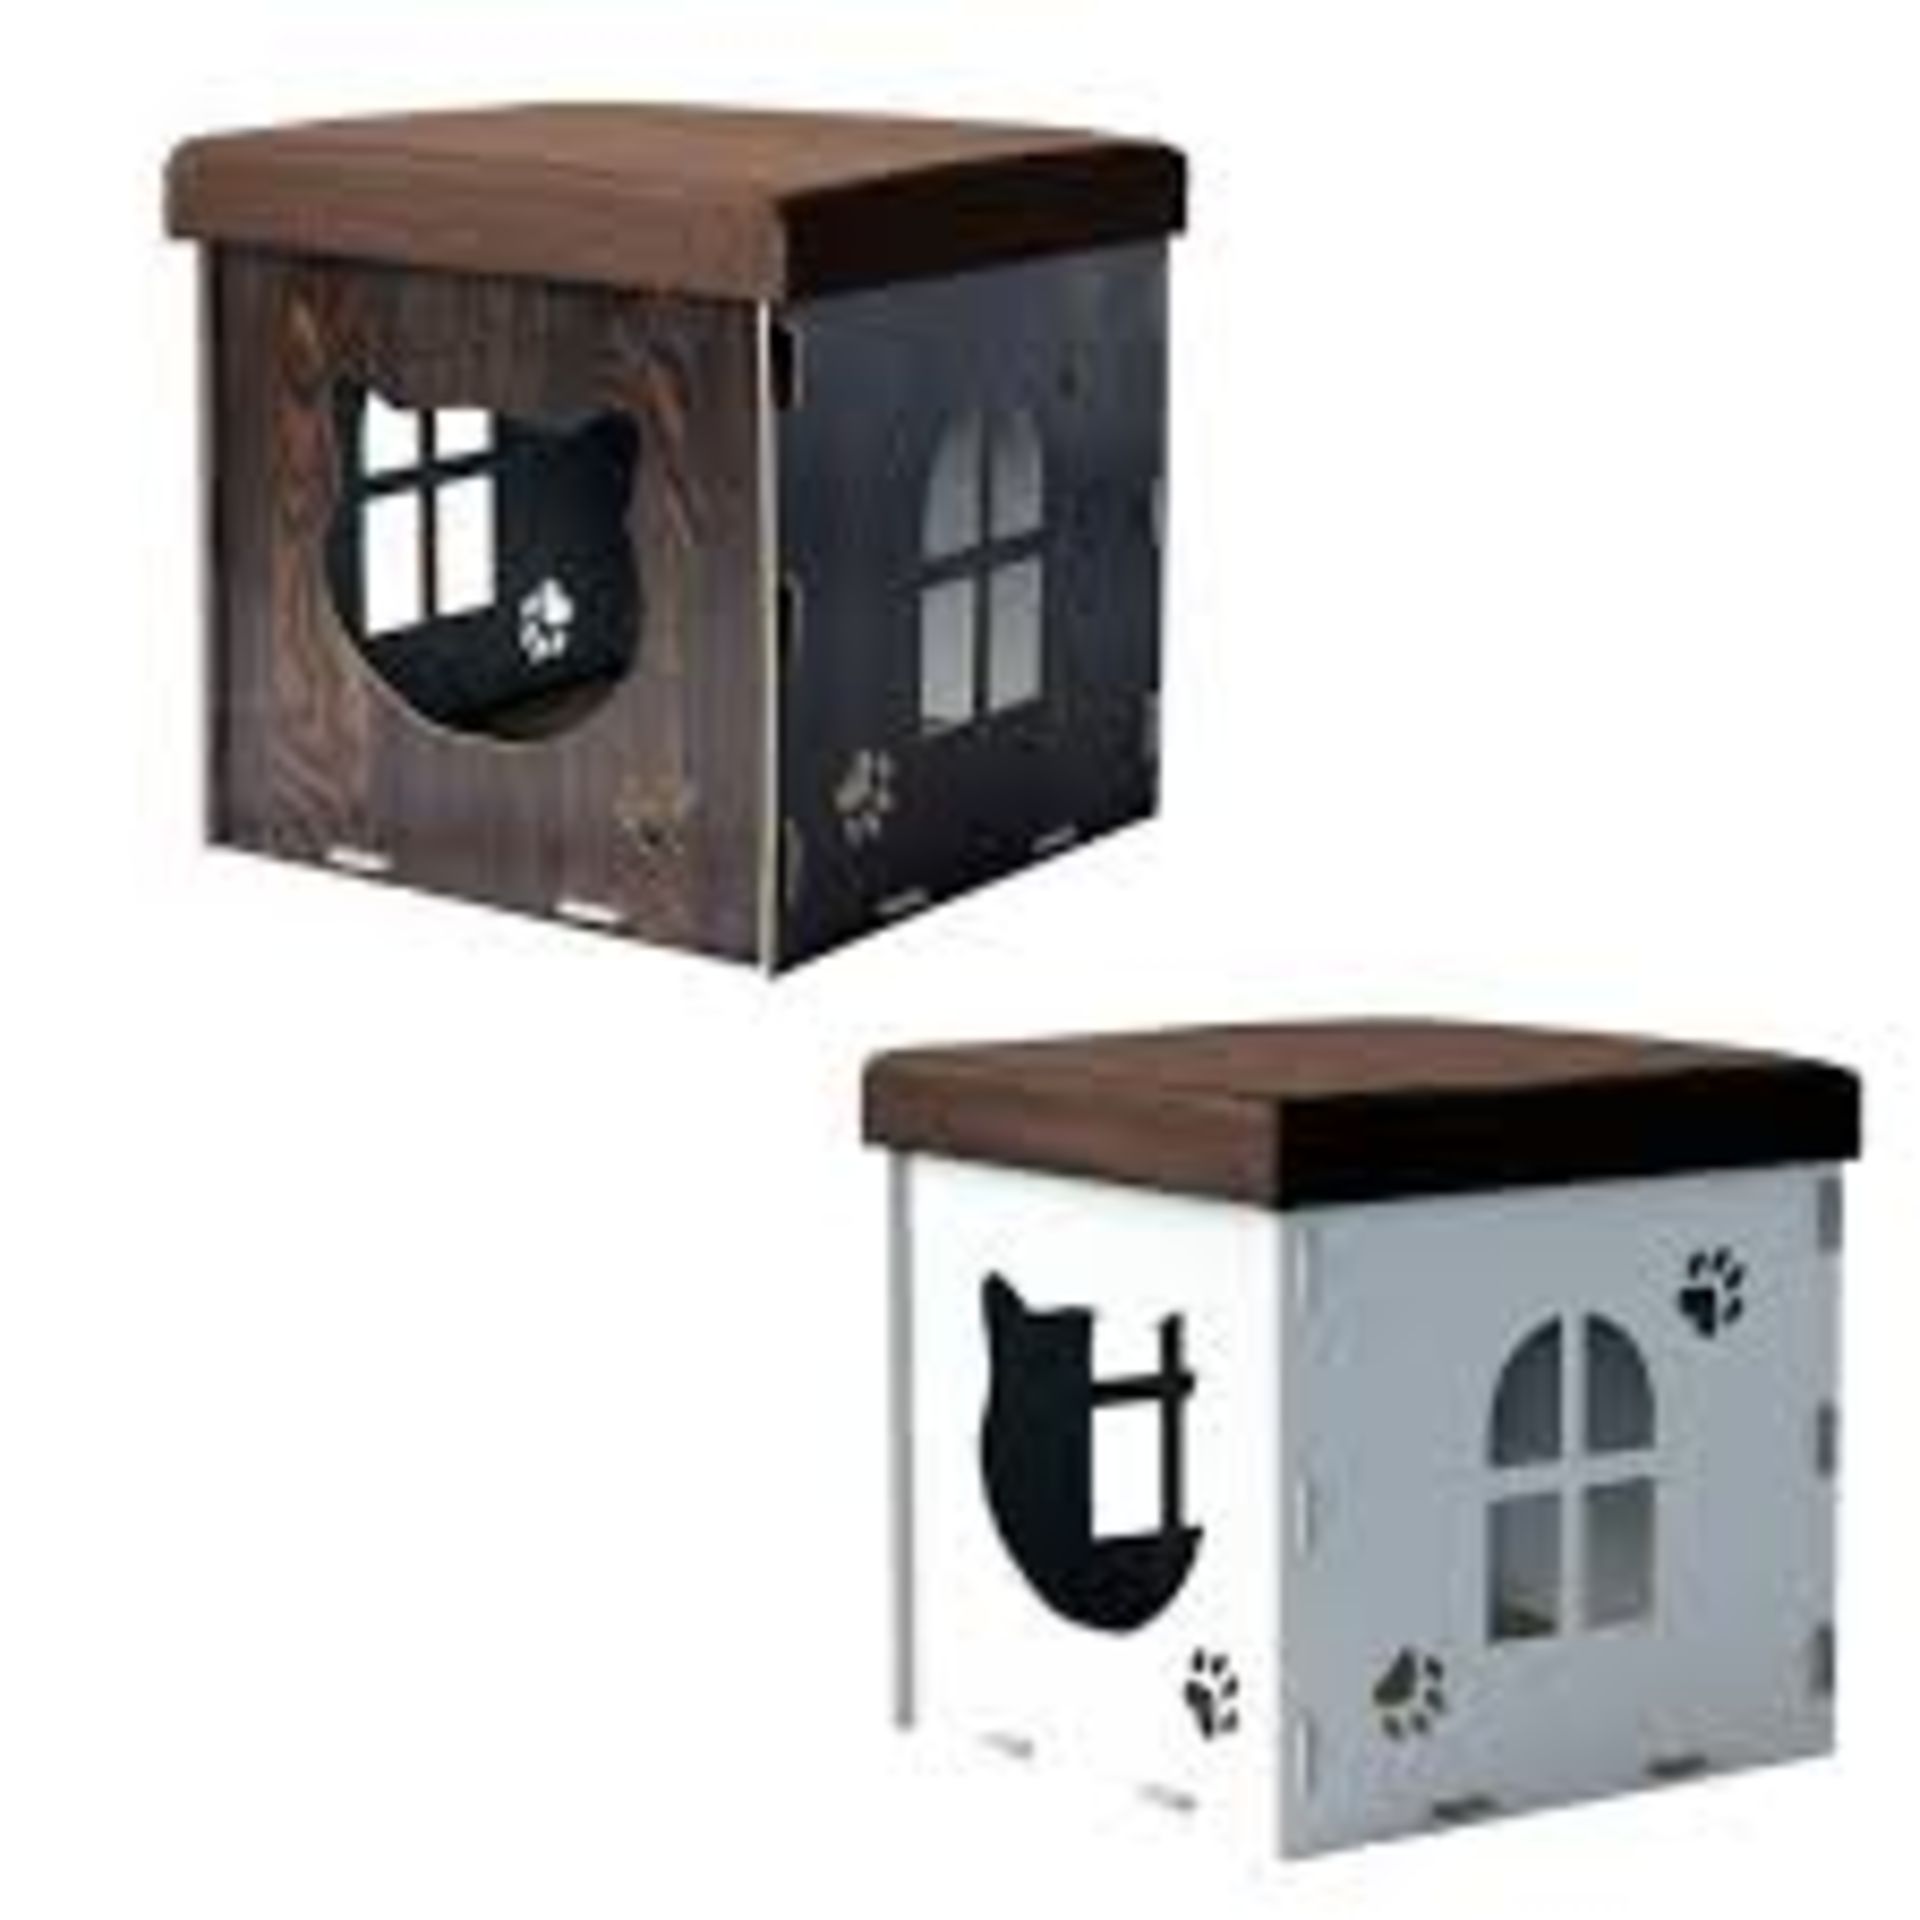 Boxed Pawhut 40cm Cat Condo in Black RRP £40 (16367) (Public Viewing and Appraisals Available)